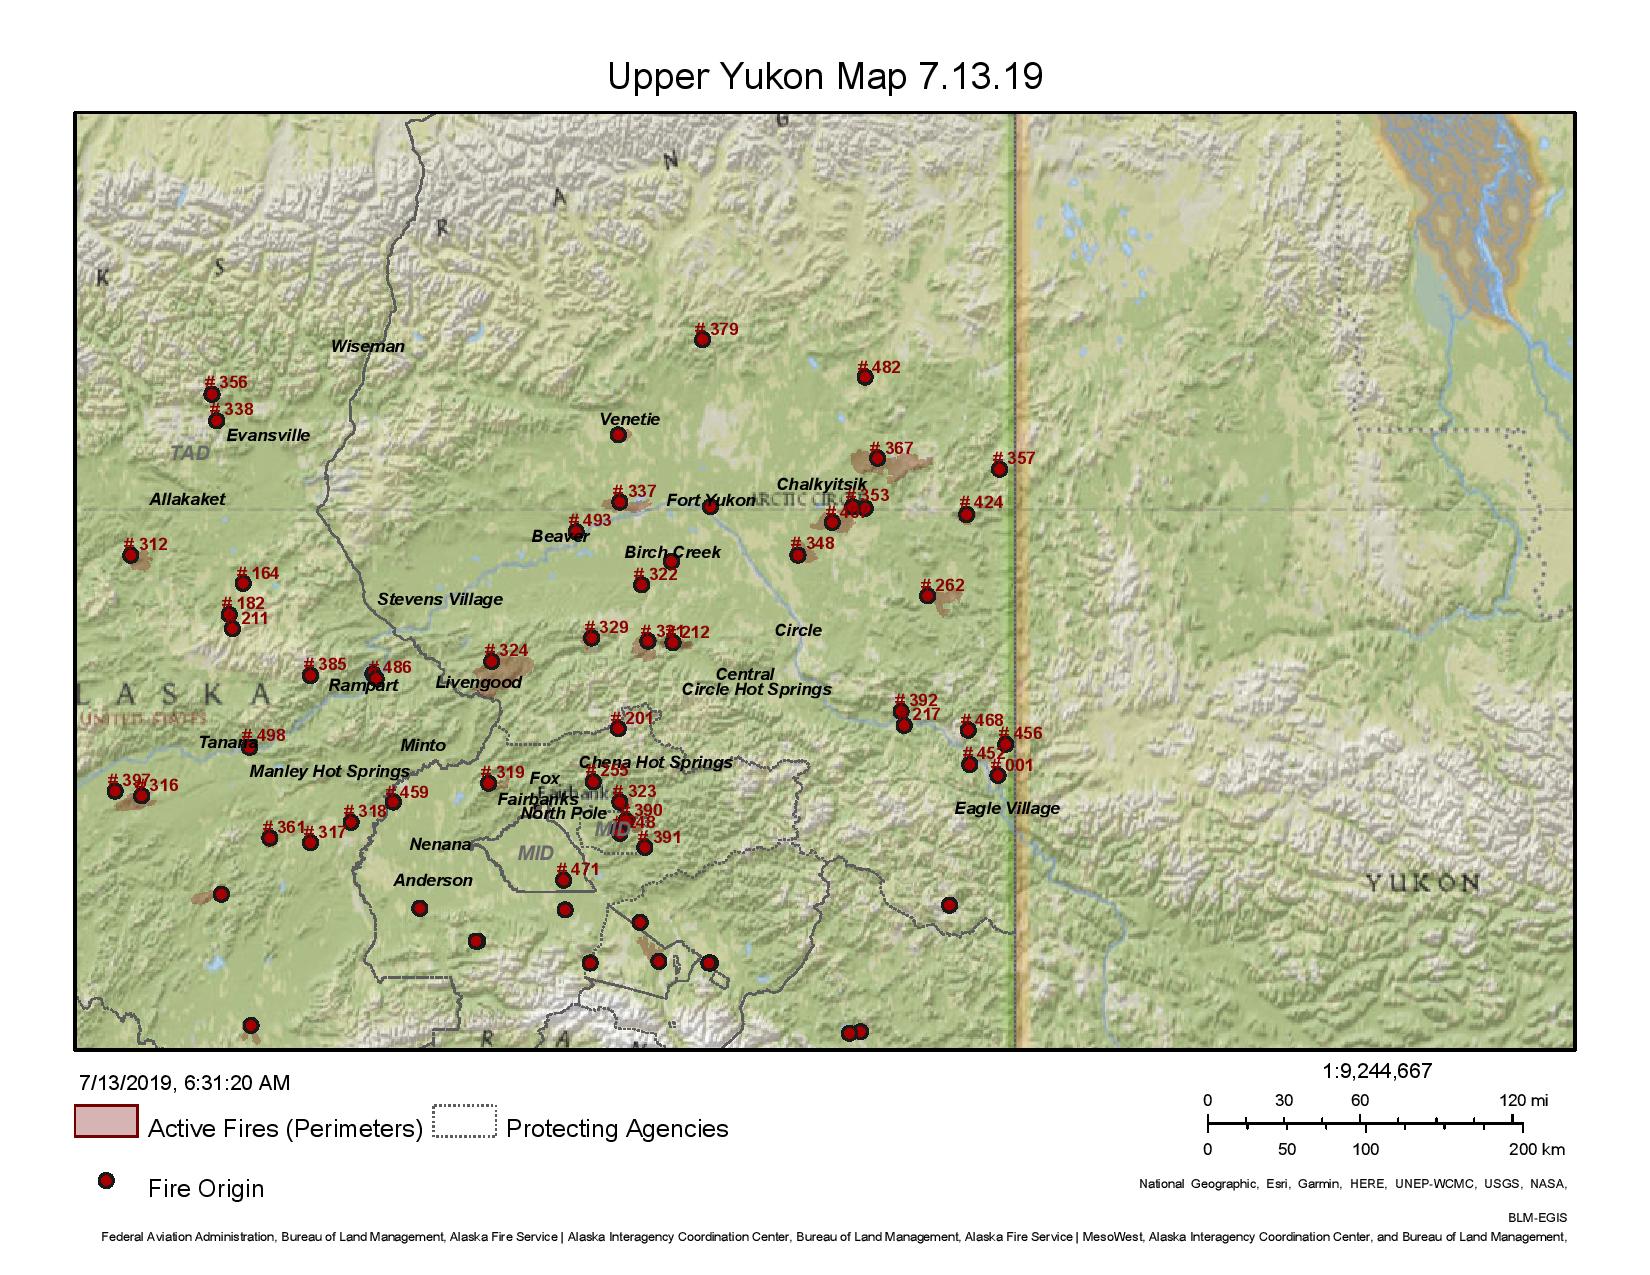 Map of Upper Yukon Fire Management Zone area fires on July 13, 2019.